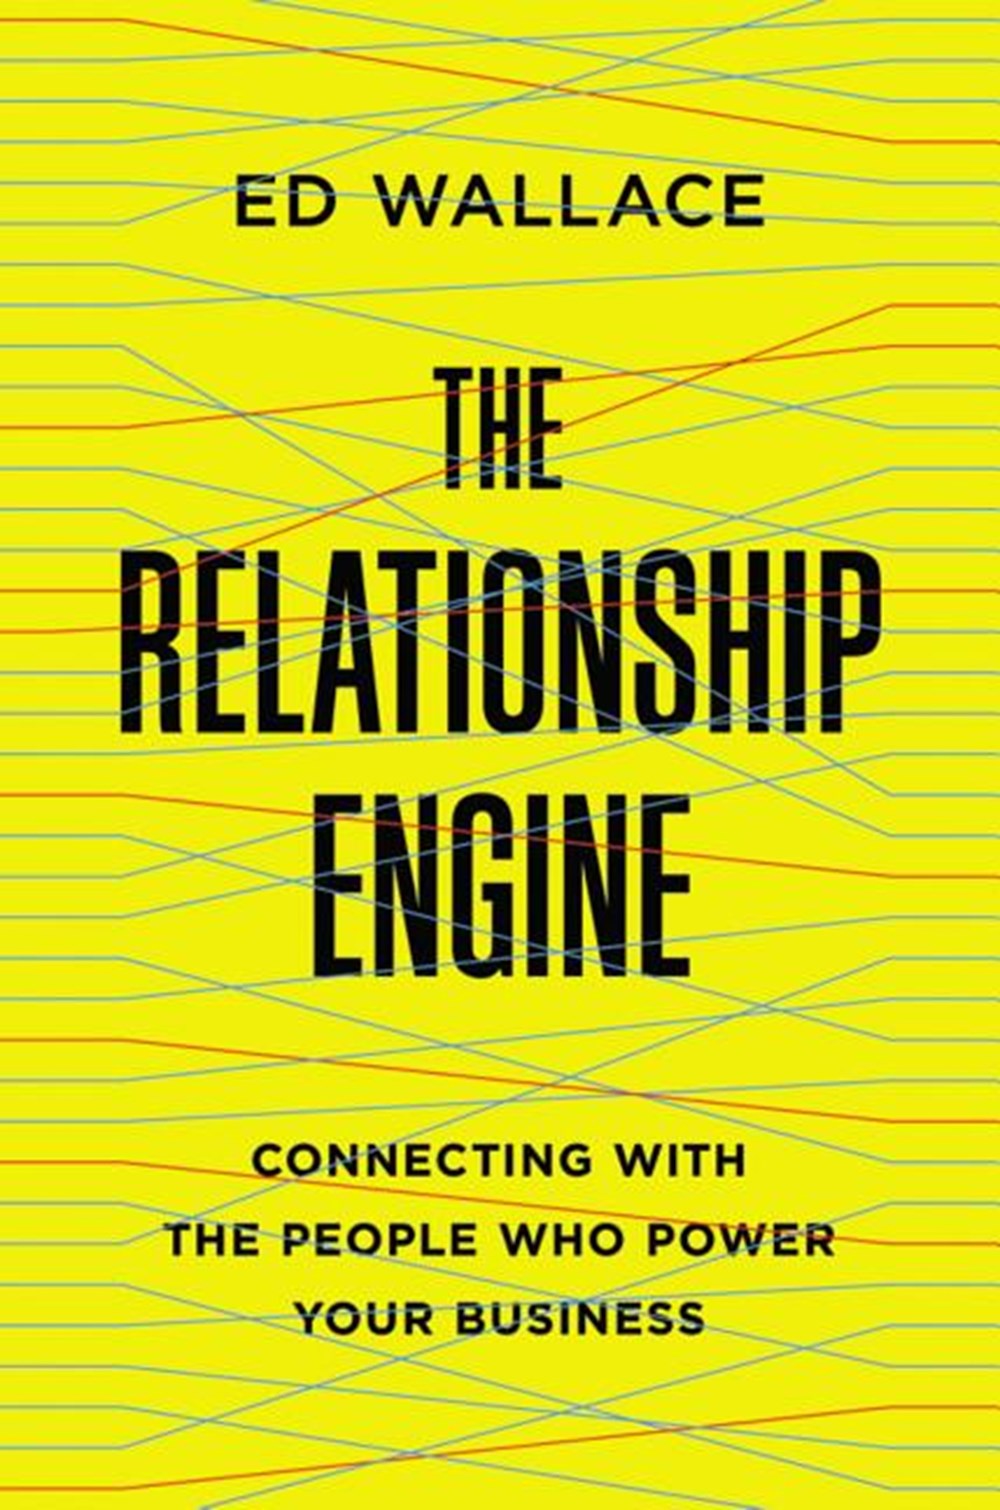 Relationship Engine Connecting with the People Who Power Your Business